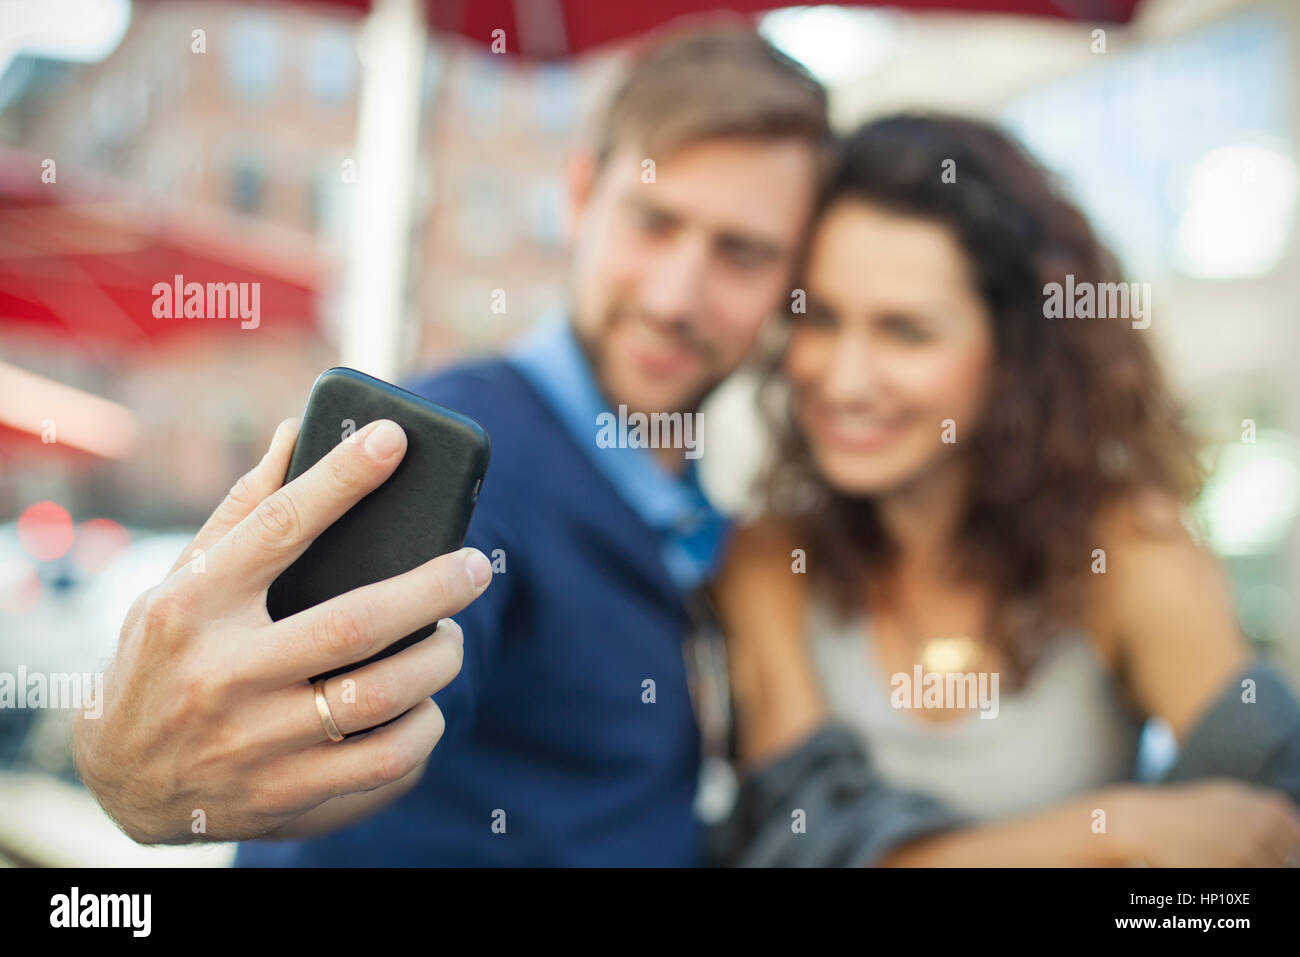 Man using smartphone to photgraph himself with his wife Stock Photo